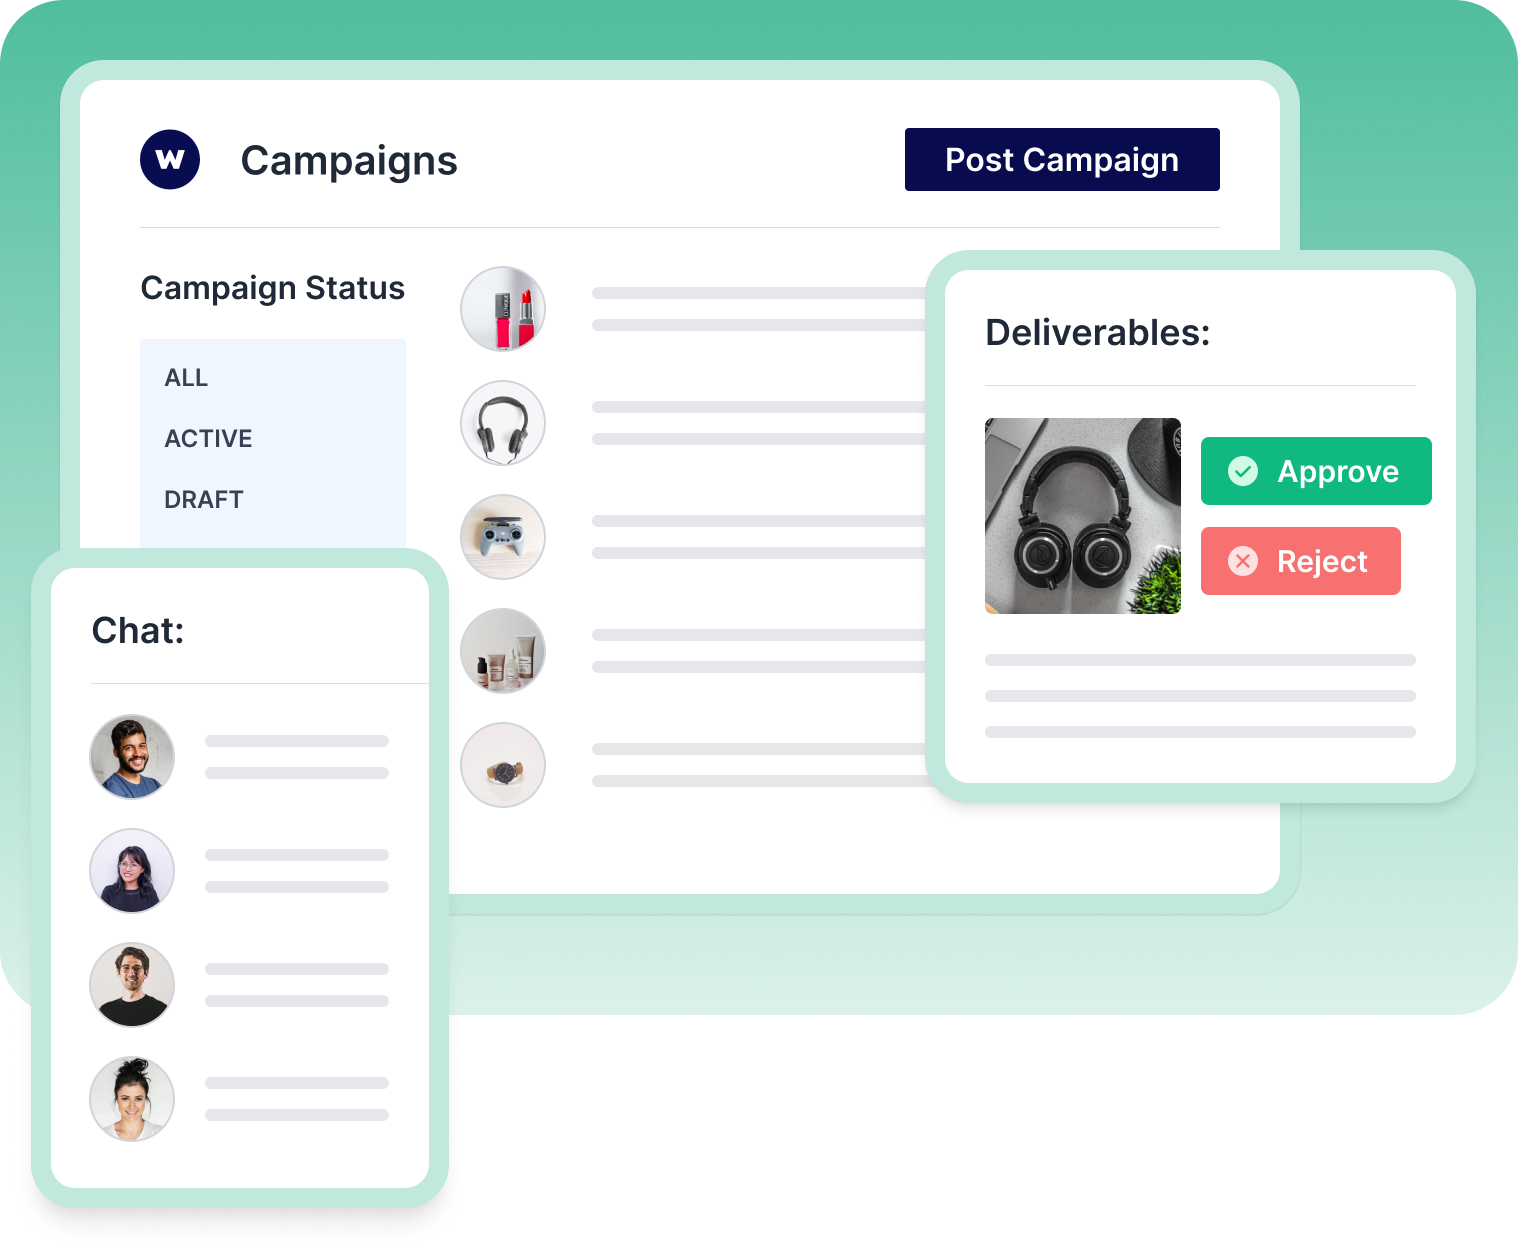 Get a detailed campaign performance, reach & other metrics.